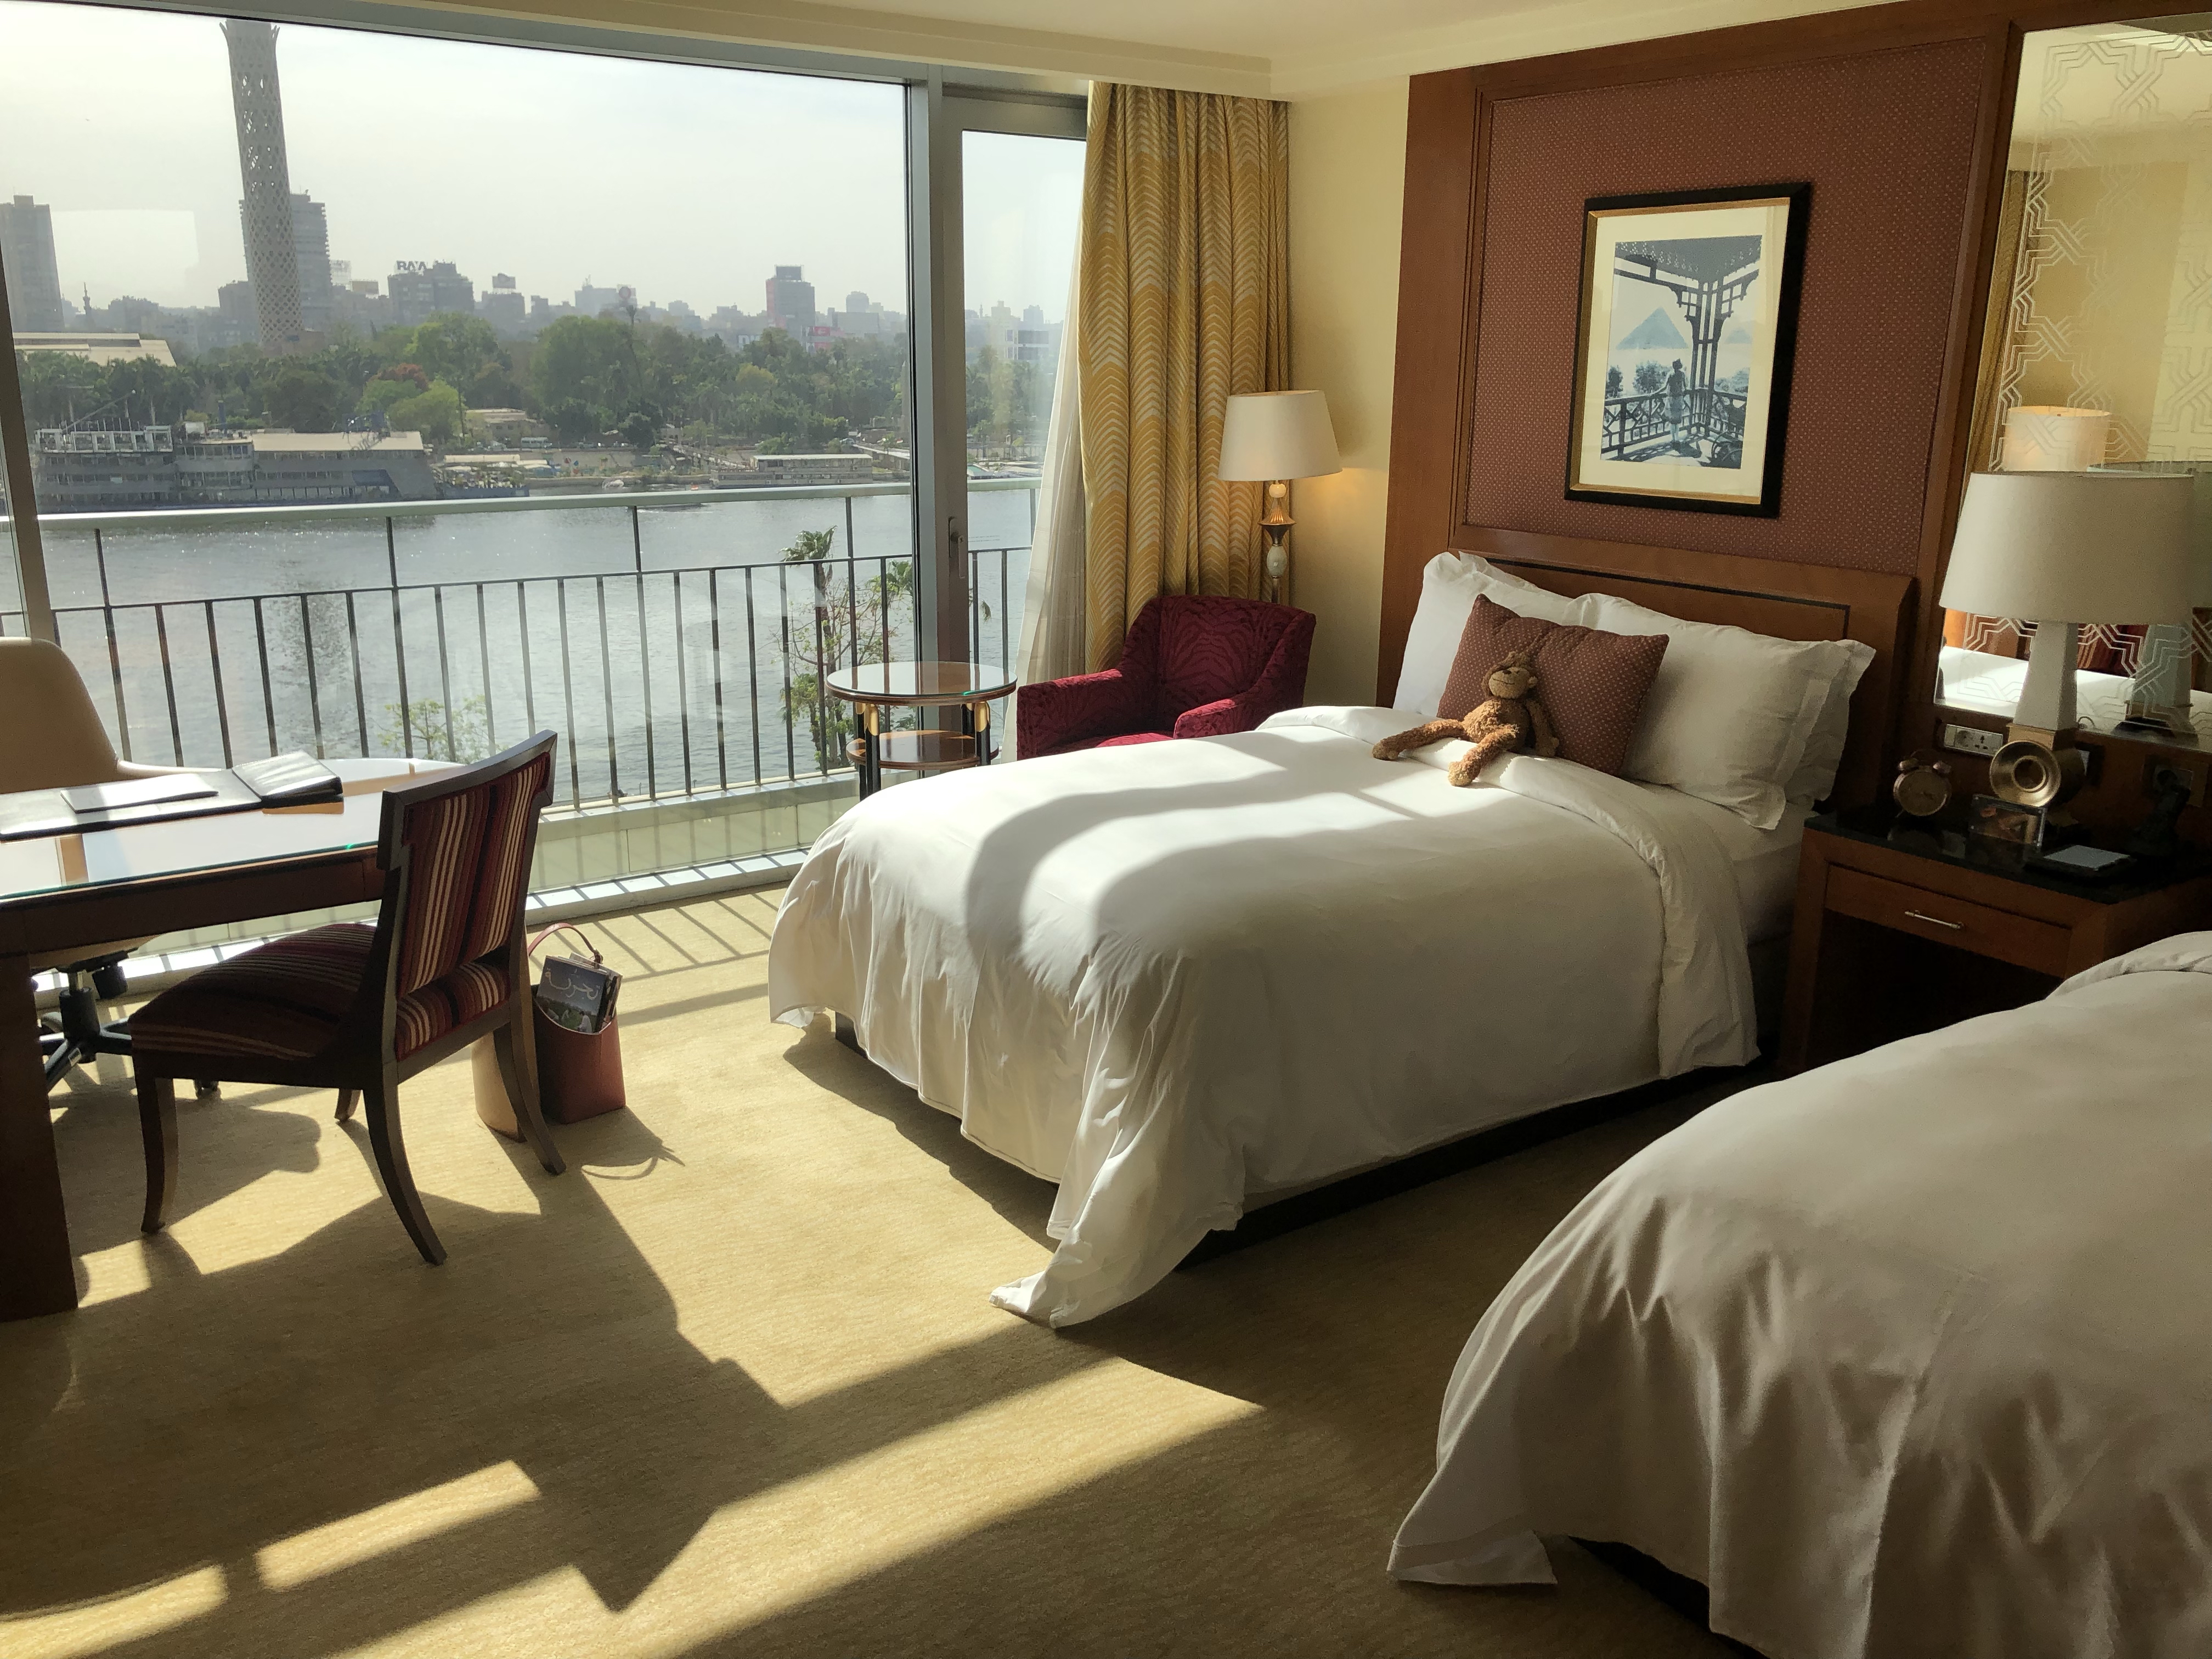 a room with two beds and a balcony overlooking a river